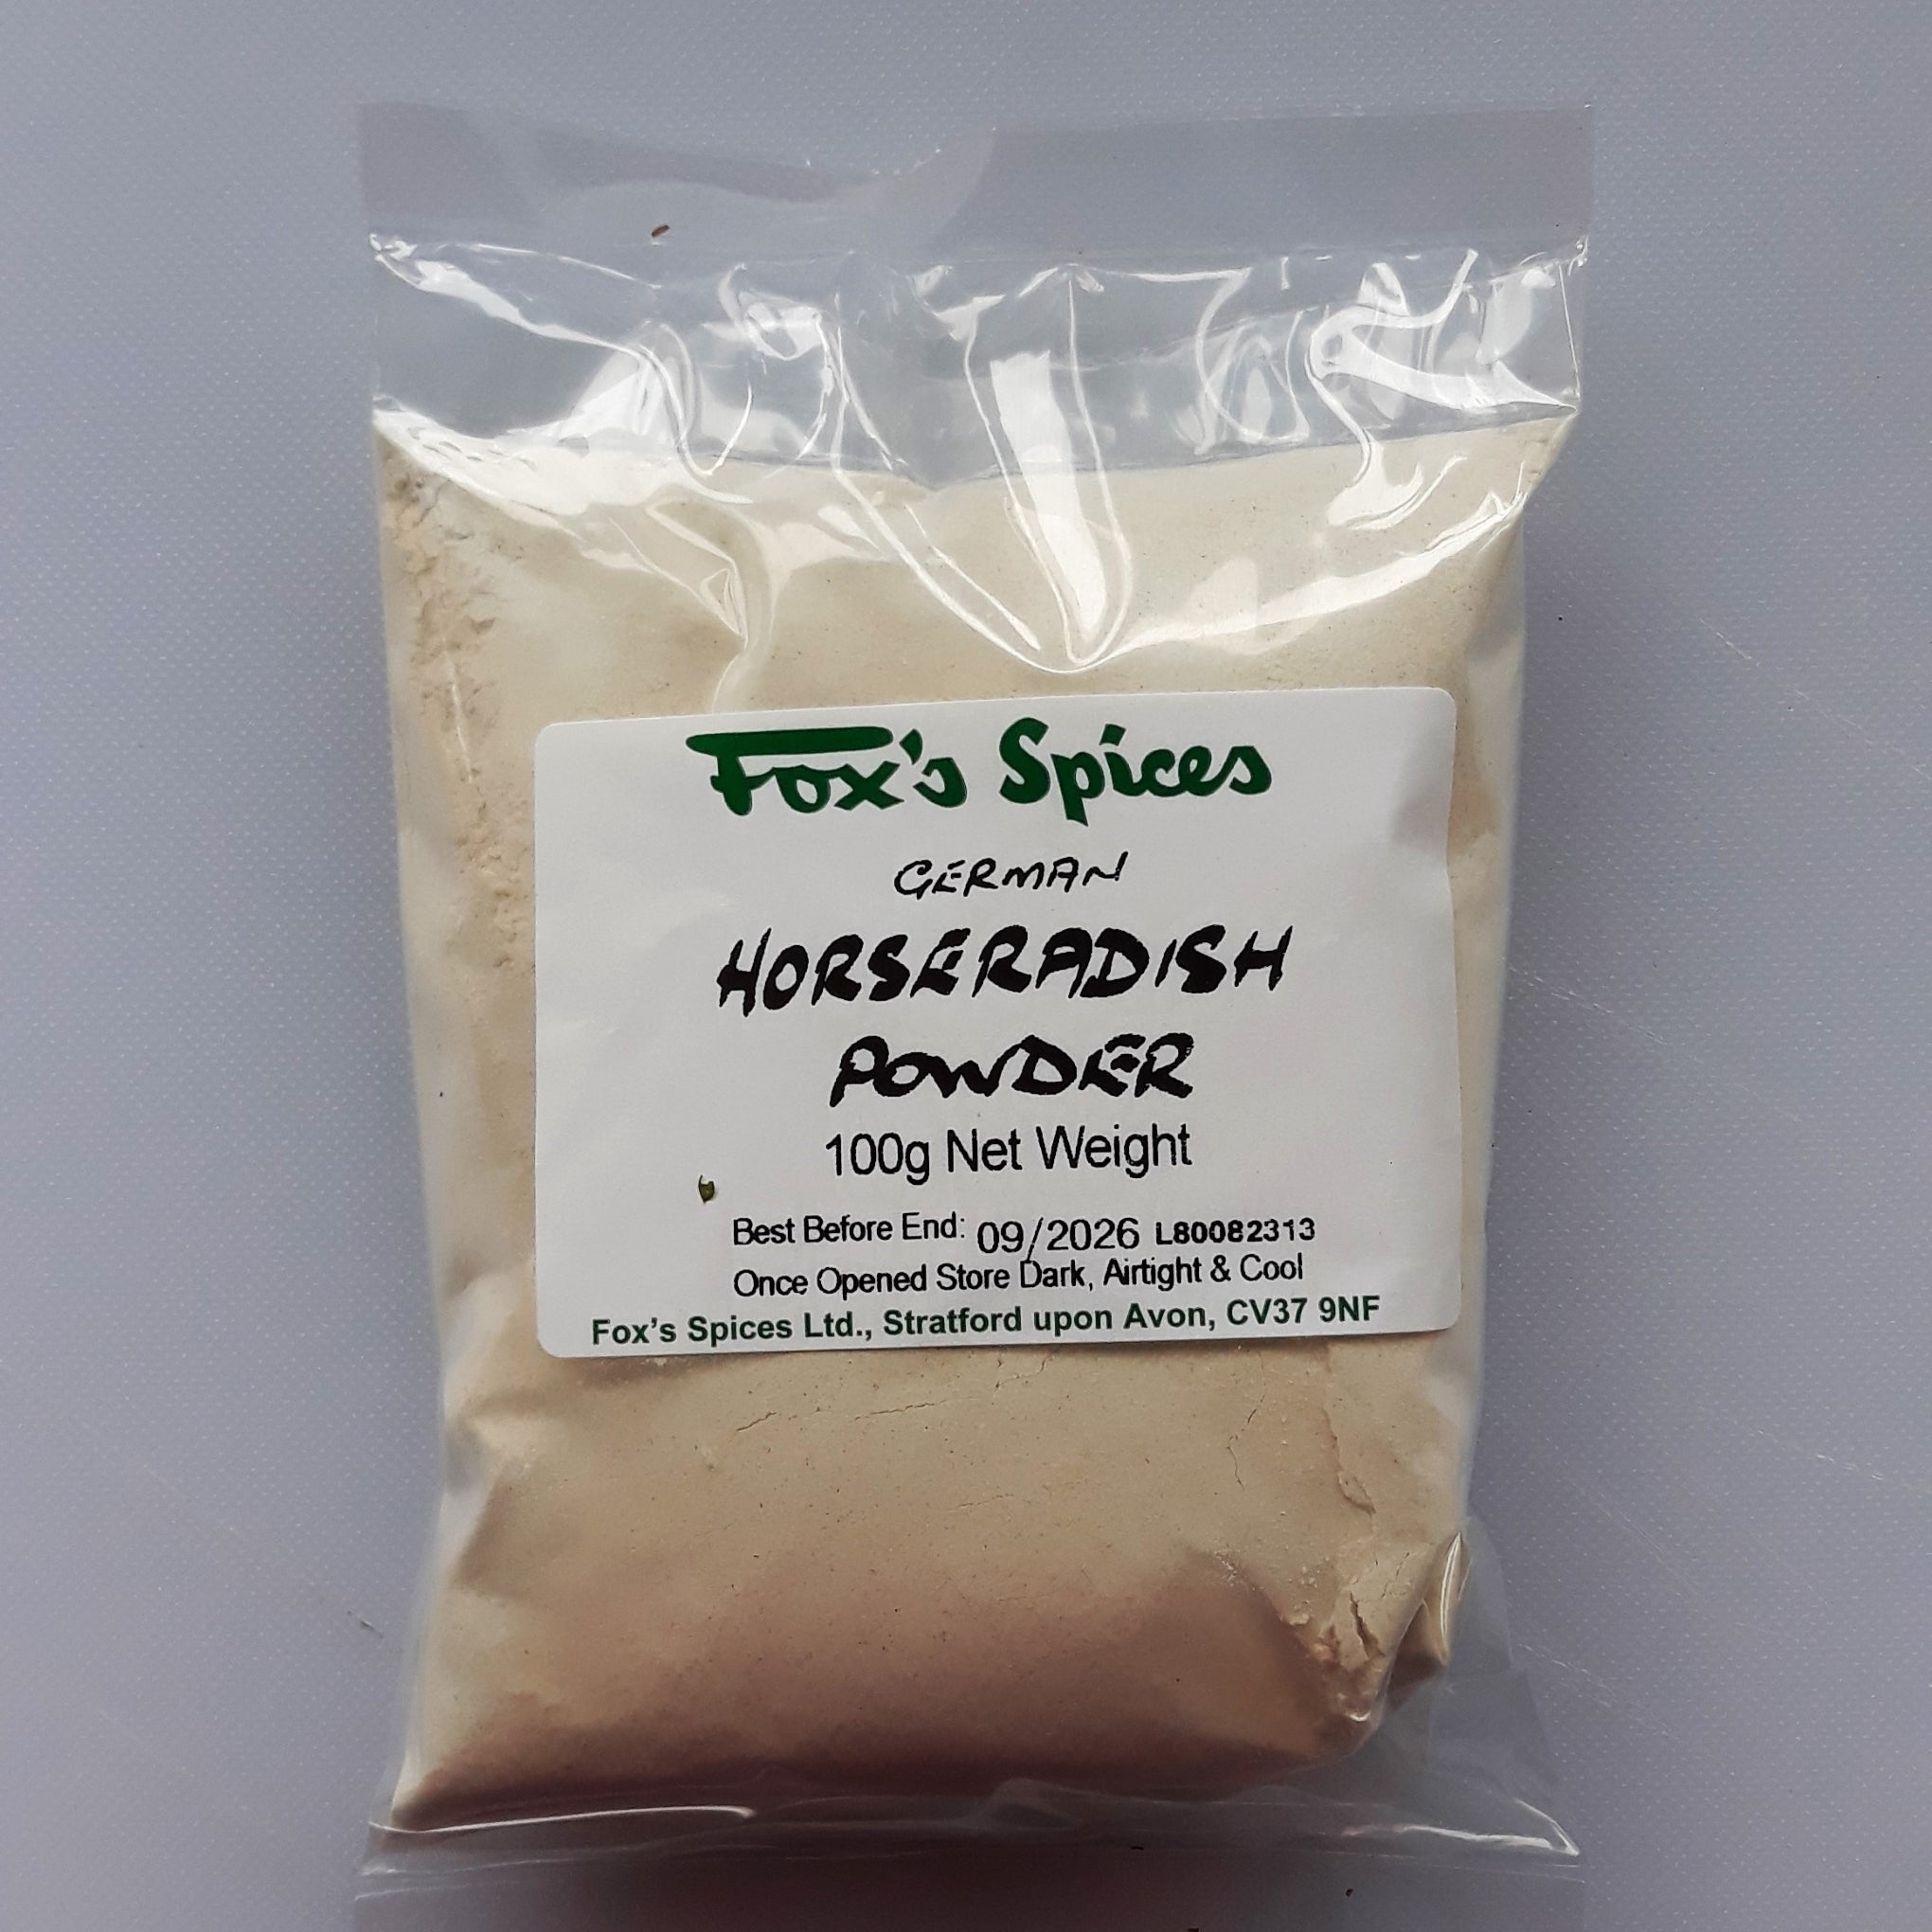 Fox's Spices Horseradish Powder sold in 100g bags.